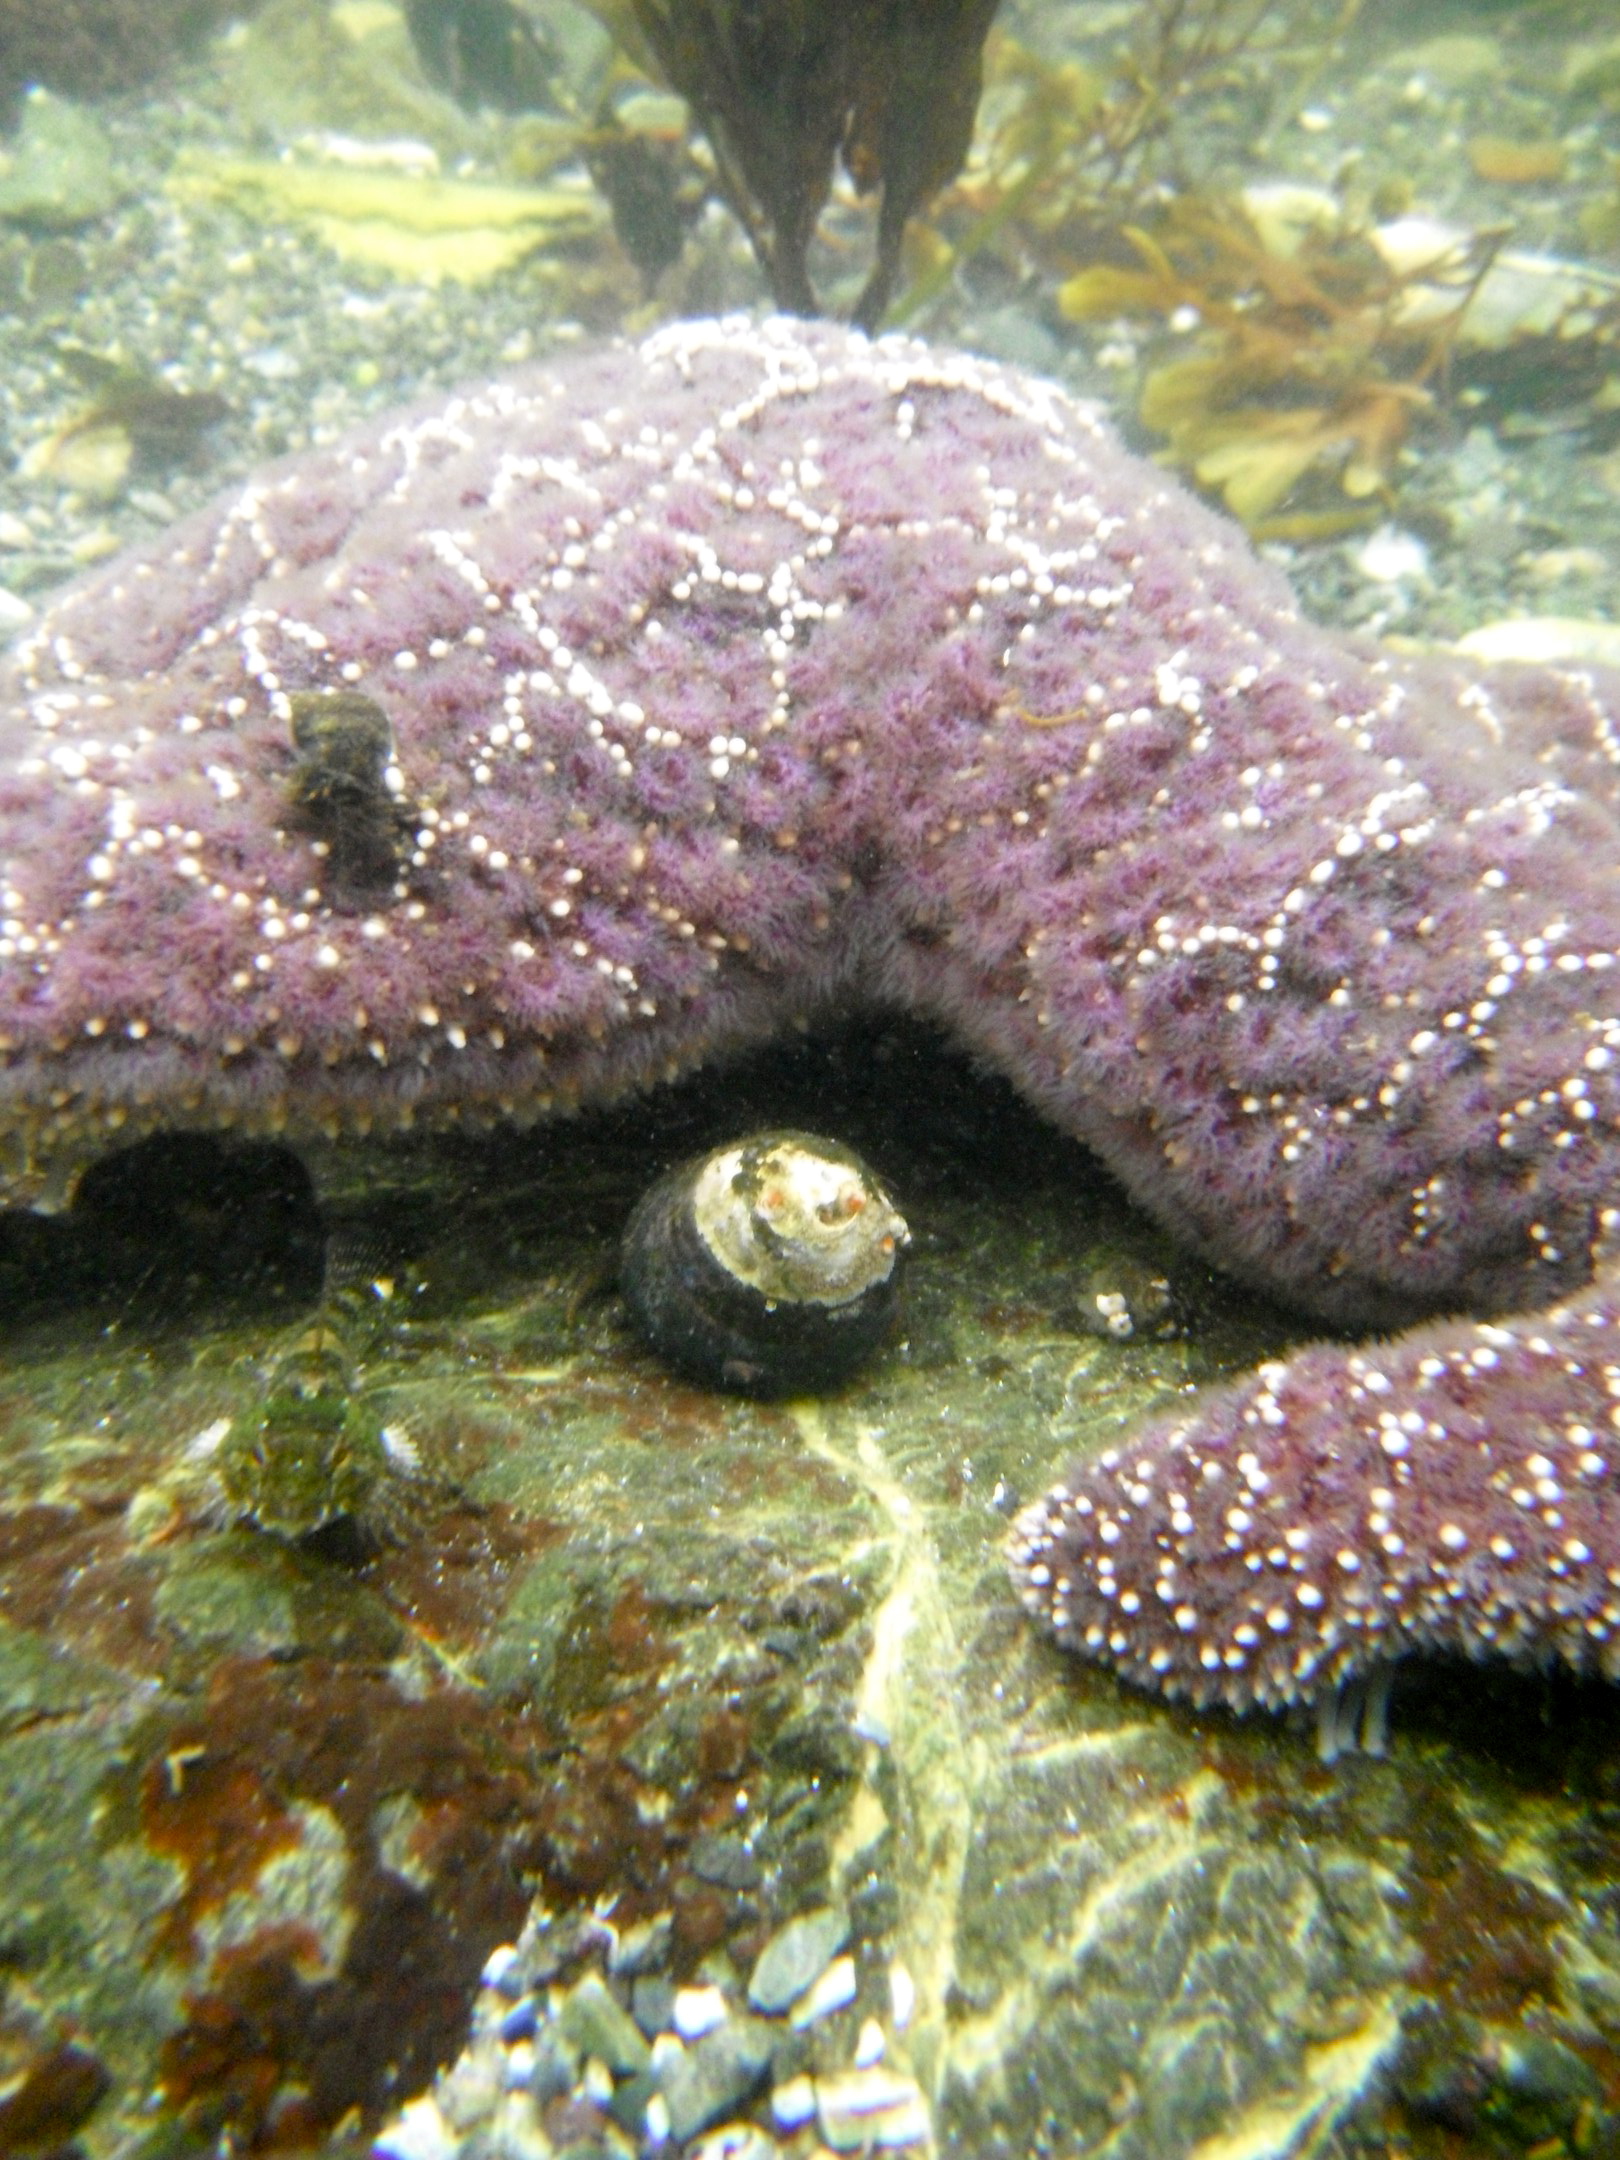 close up underwater shot of an ochre star (Pisaster ochraceus) with a small black turban snail nearby between the arms. The whole seastar does not even fit in the frame.